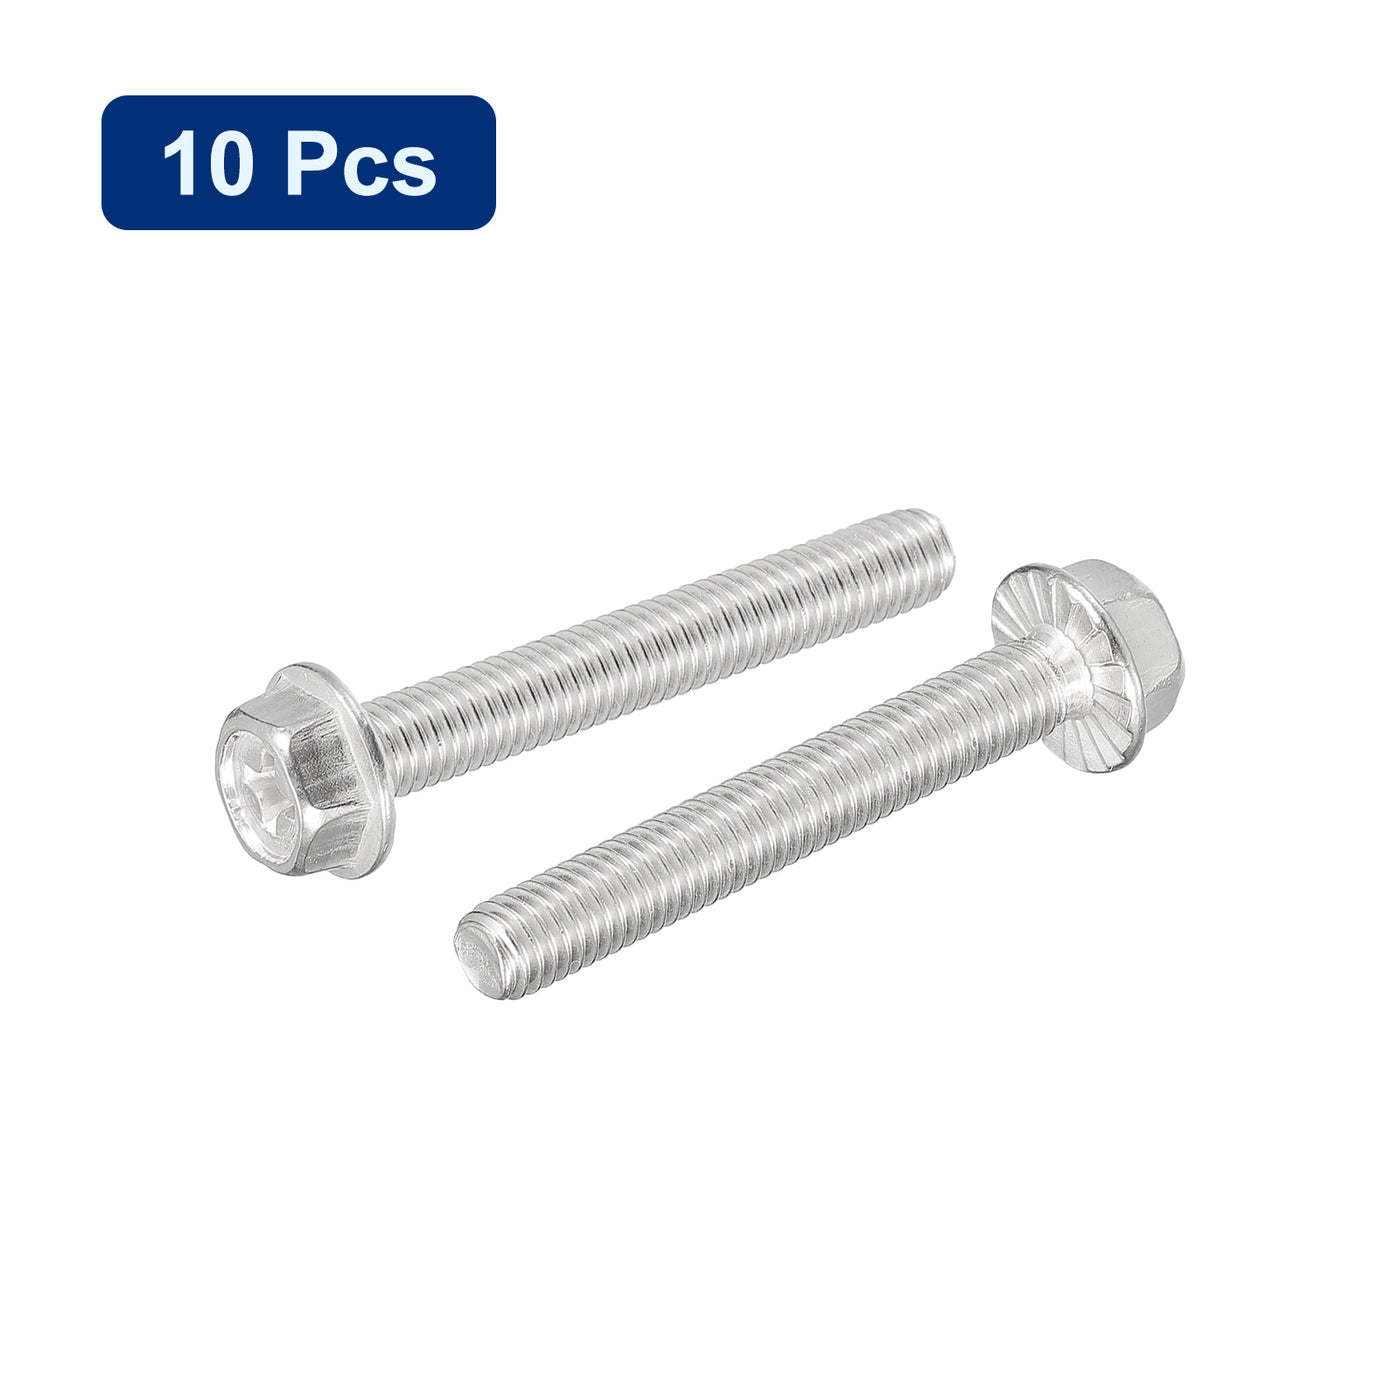 uxcell Uxcell M5x35mm Phillips Hex Head Flange Bolts, 10pcs 304 Stainless Steel Screws